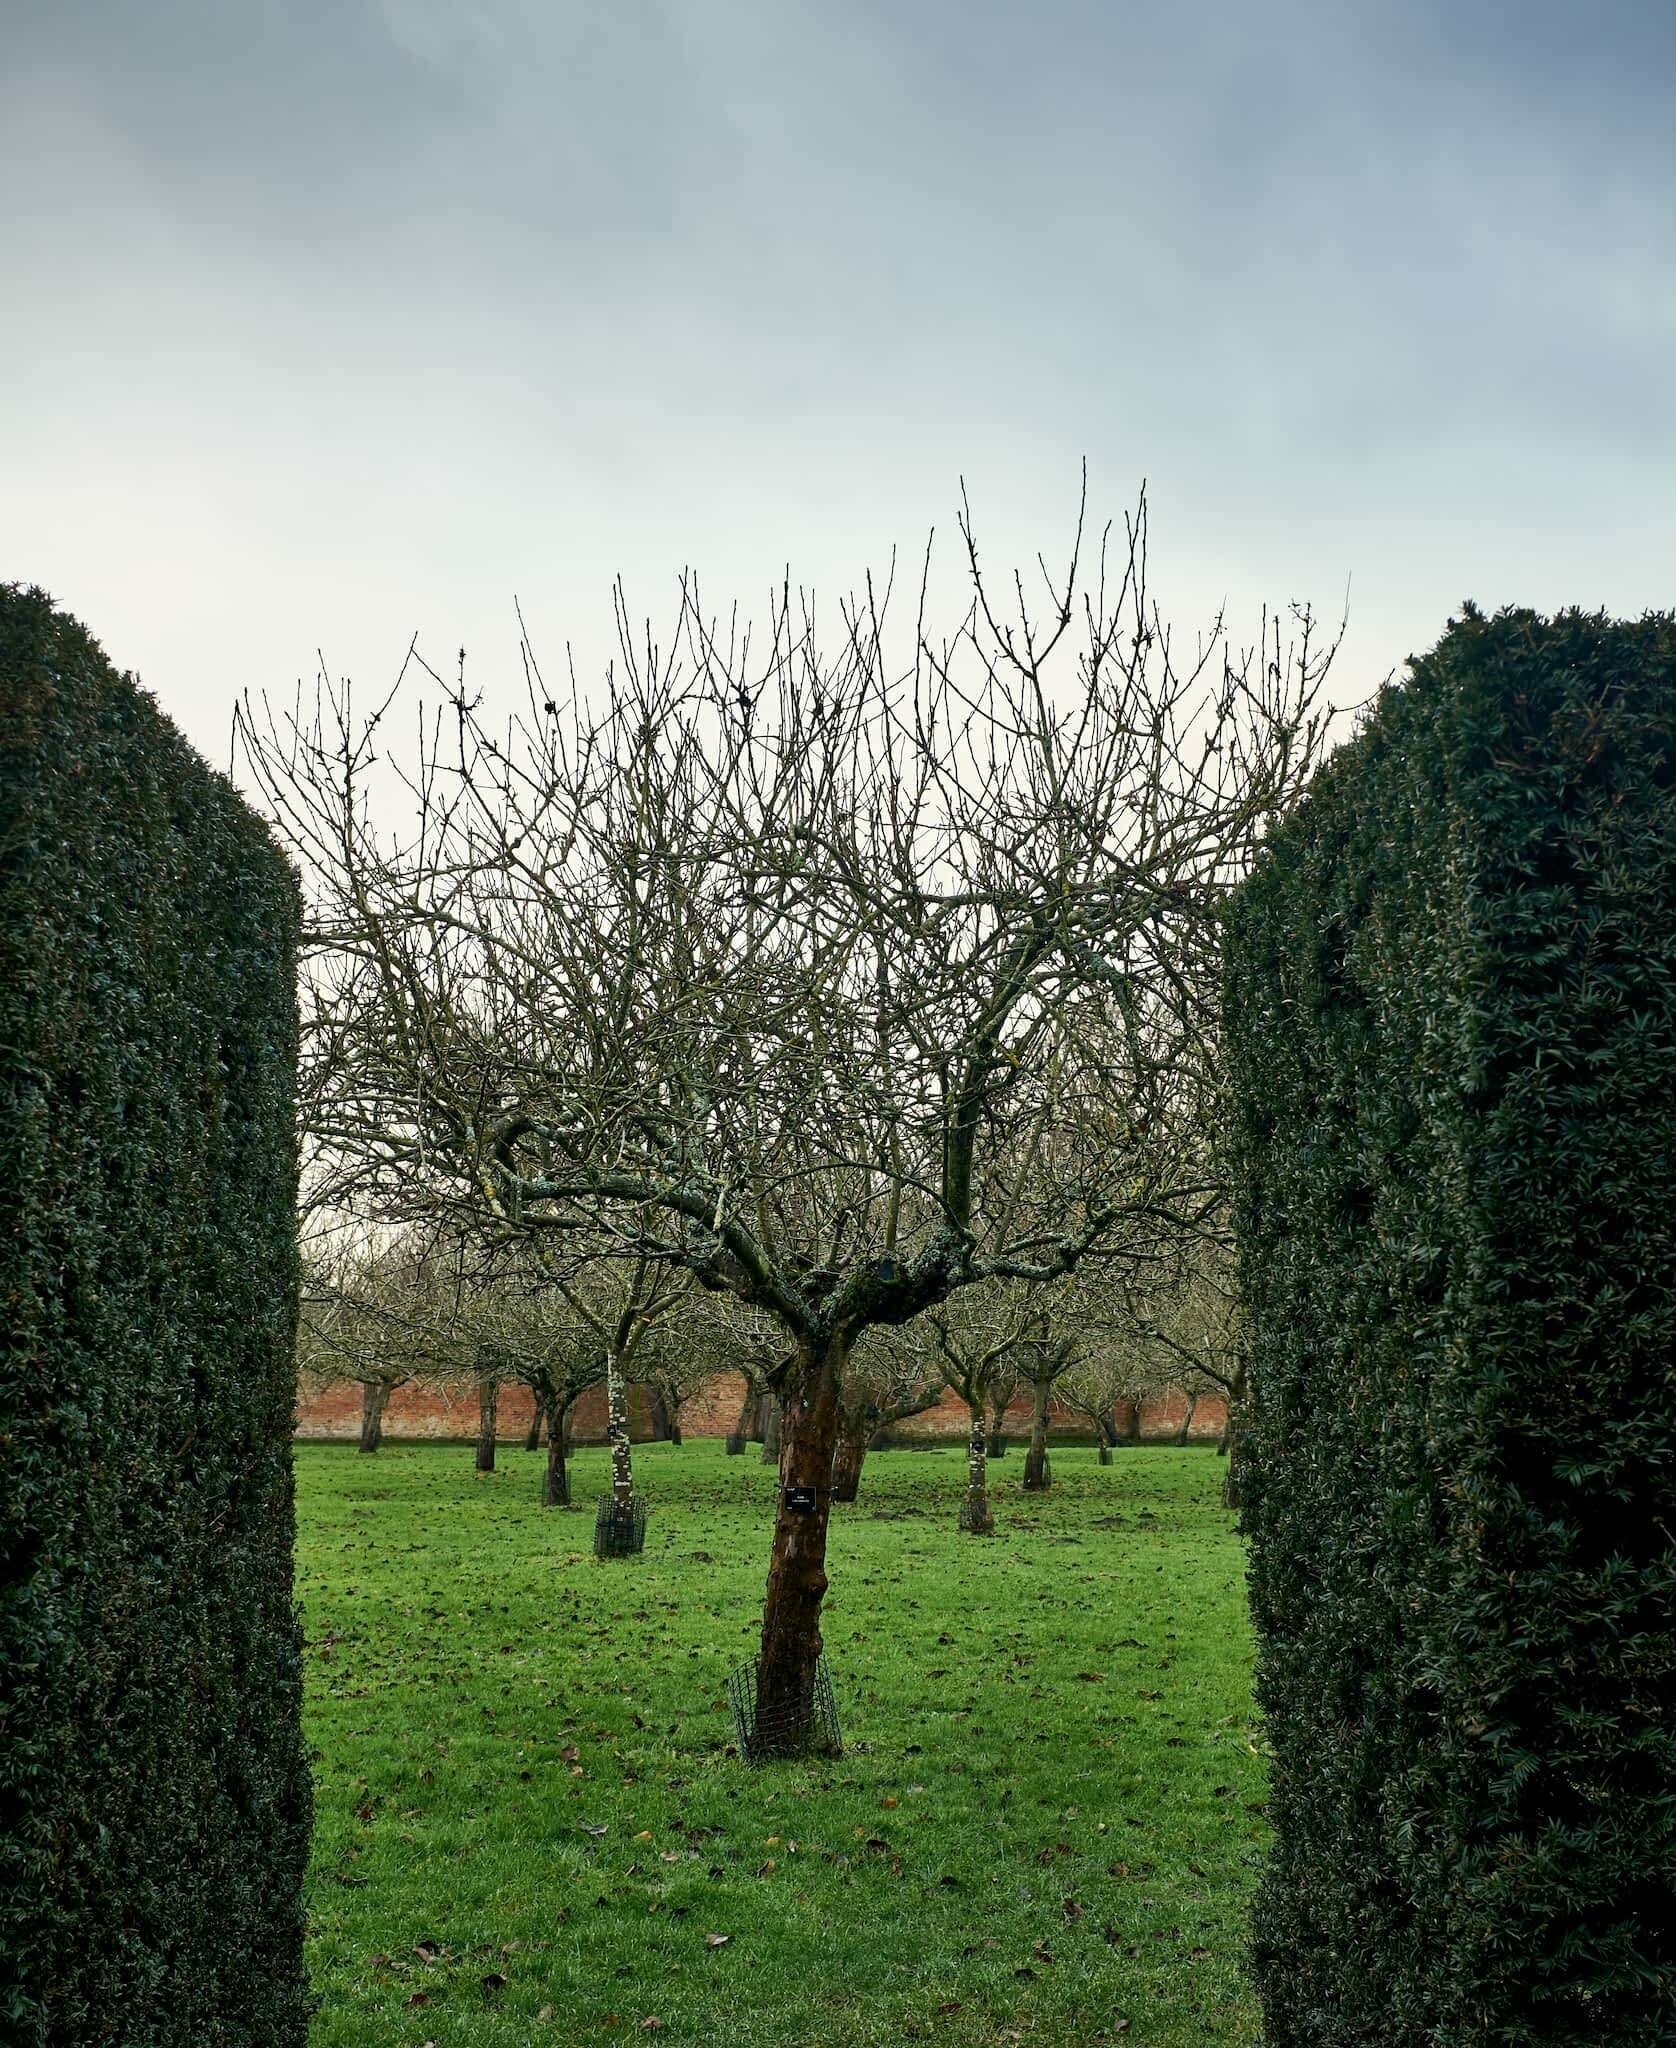 A winter scene of an orchard. An old apple tree can be seen in the gap between two dense hedges.